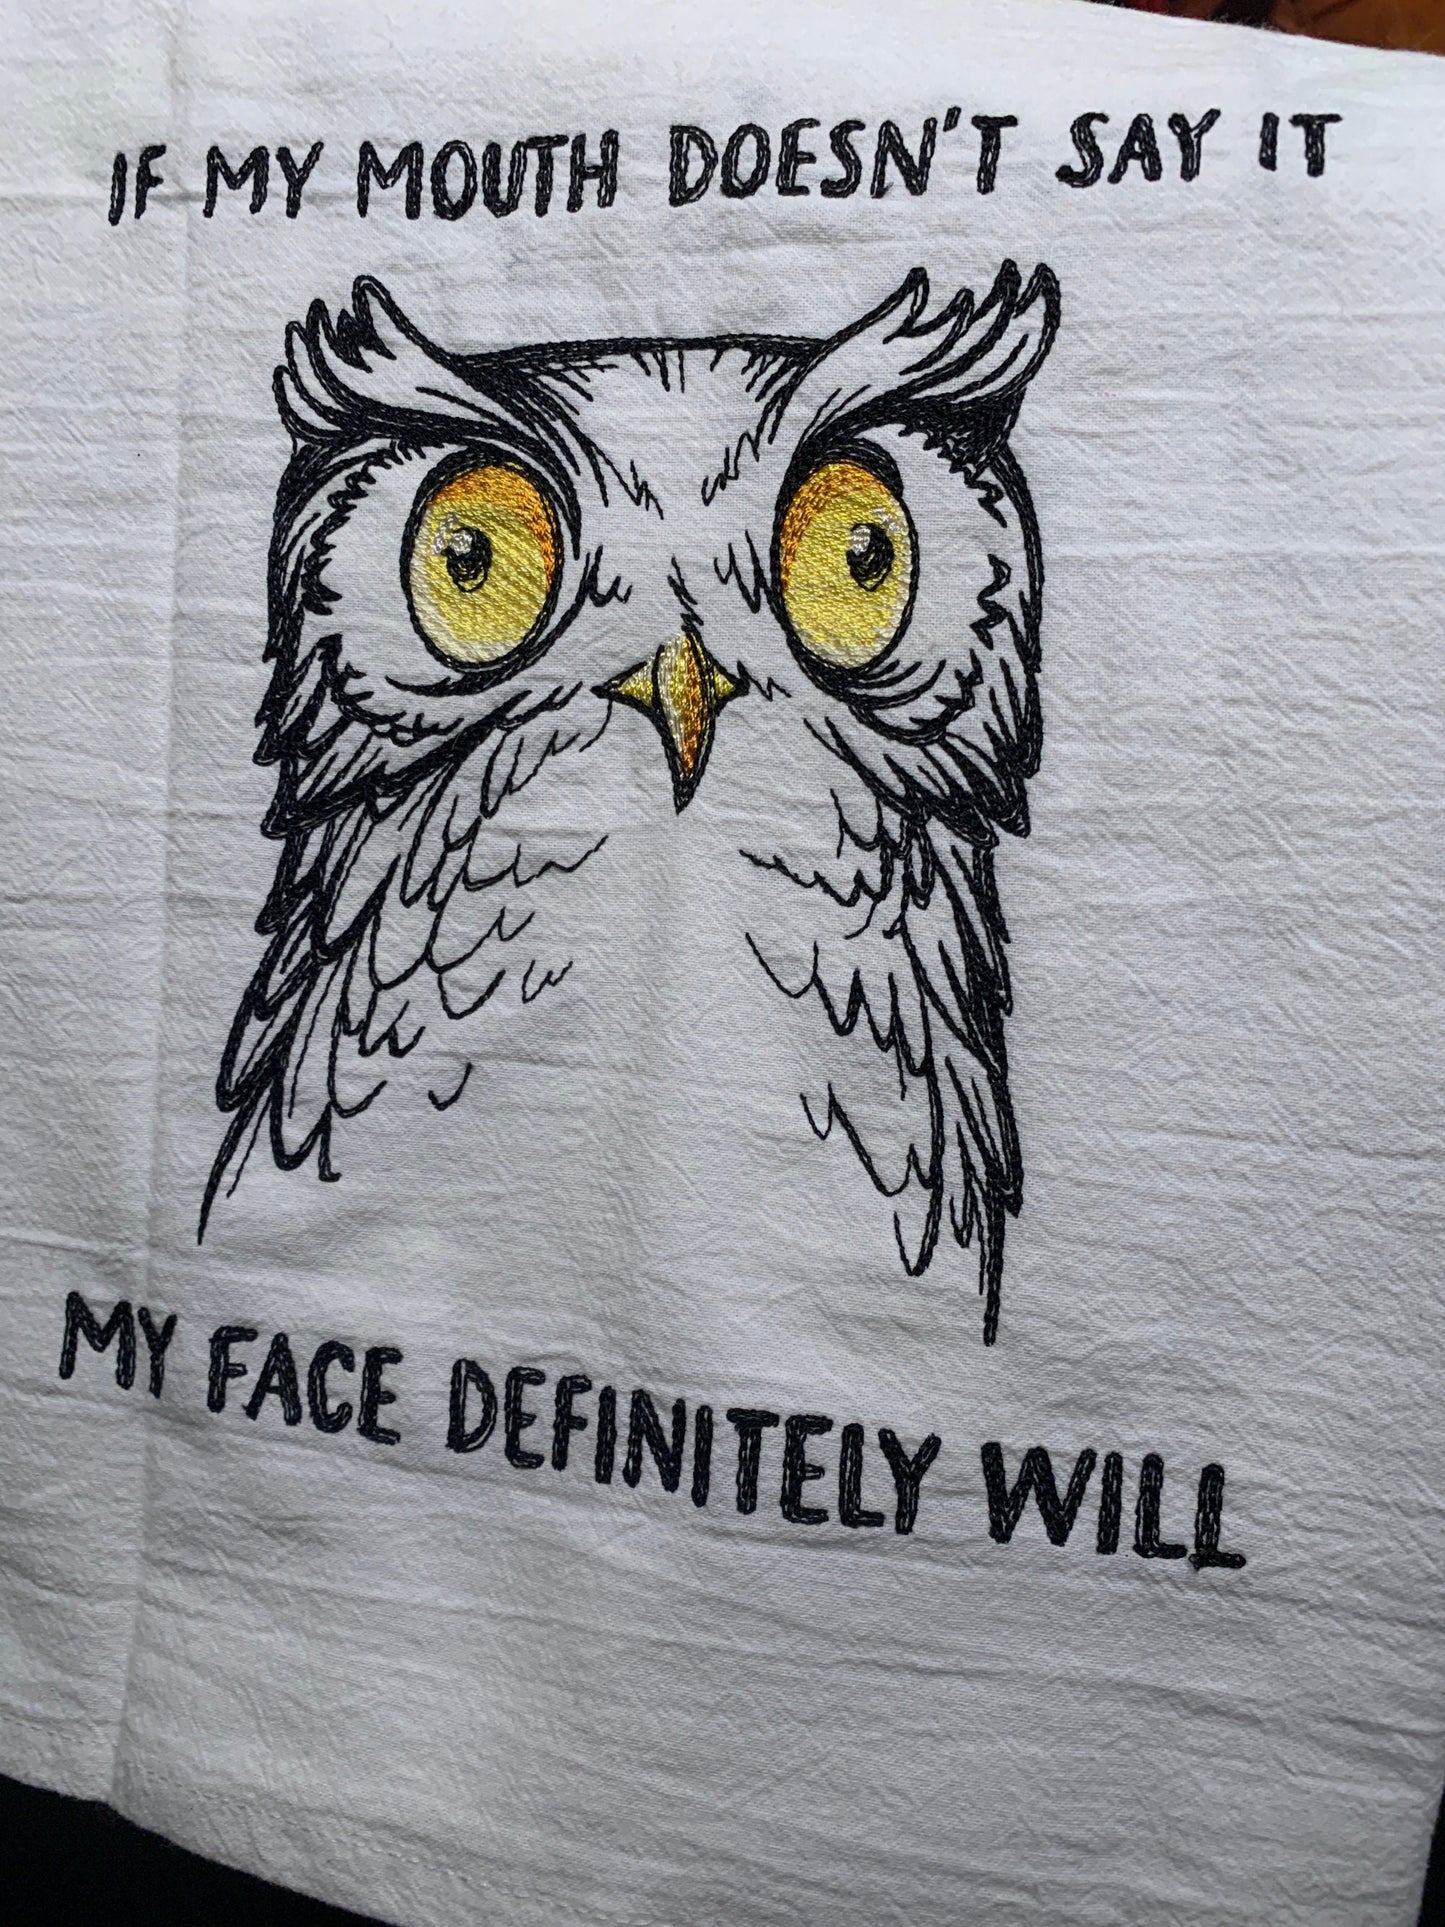 Embroidered Tea Towel "If My Mouth Doesn't Say It, My Face Definitely Will"